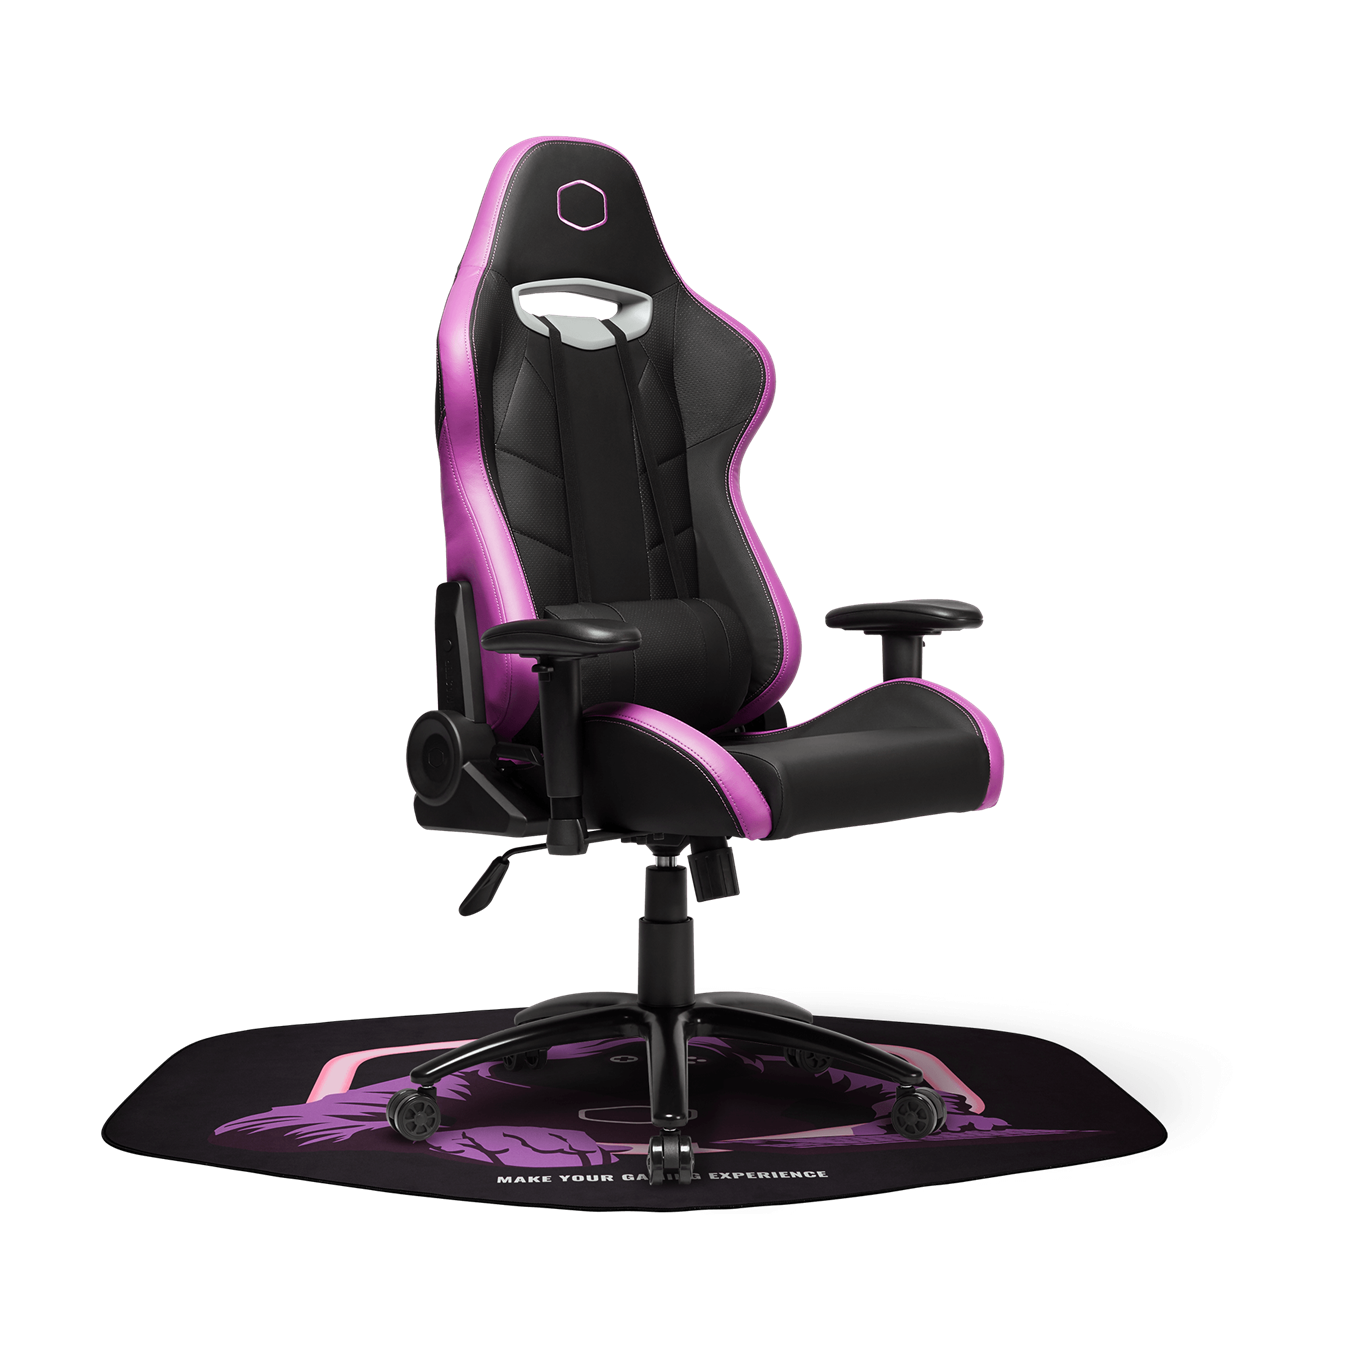 FM510 Gaming Chair Floor Mat -  With Cooler Master Mystery Gamer/Halo, and the iconic vibrant halo design on a durable 3mm thickness of 100% natural rubber, you get the comfort for your feet while having the cool graphic to highlight your room deco.